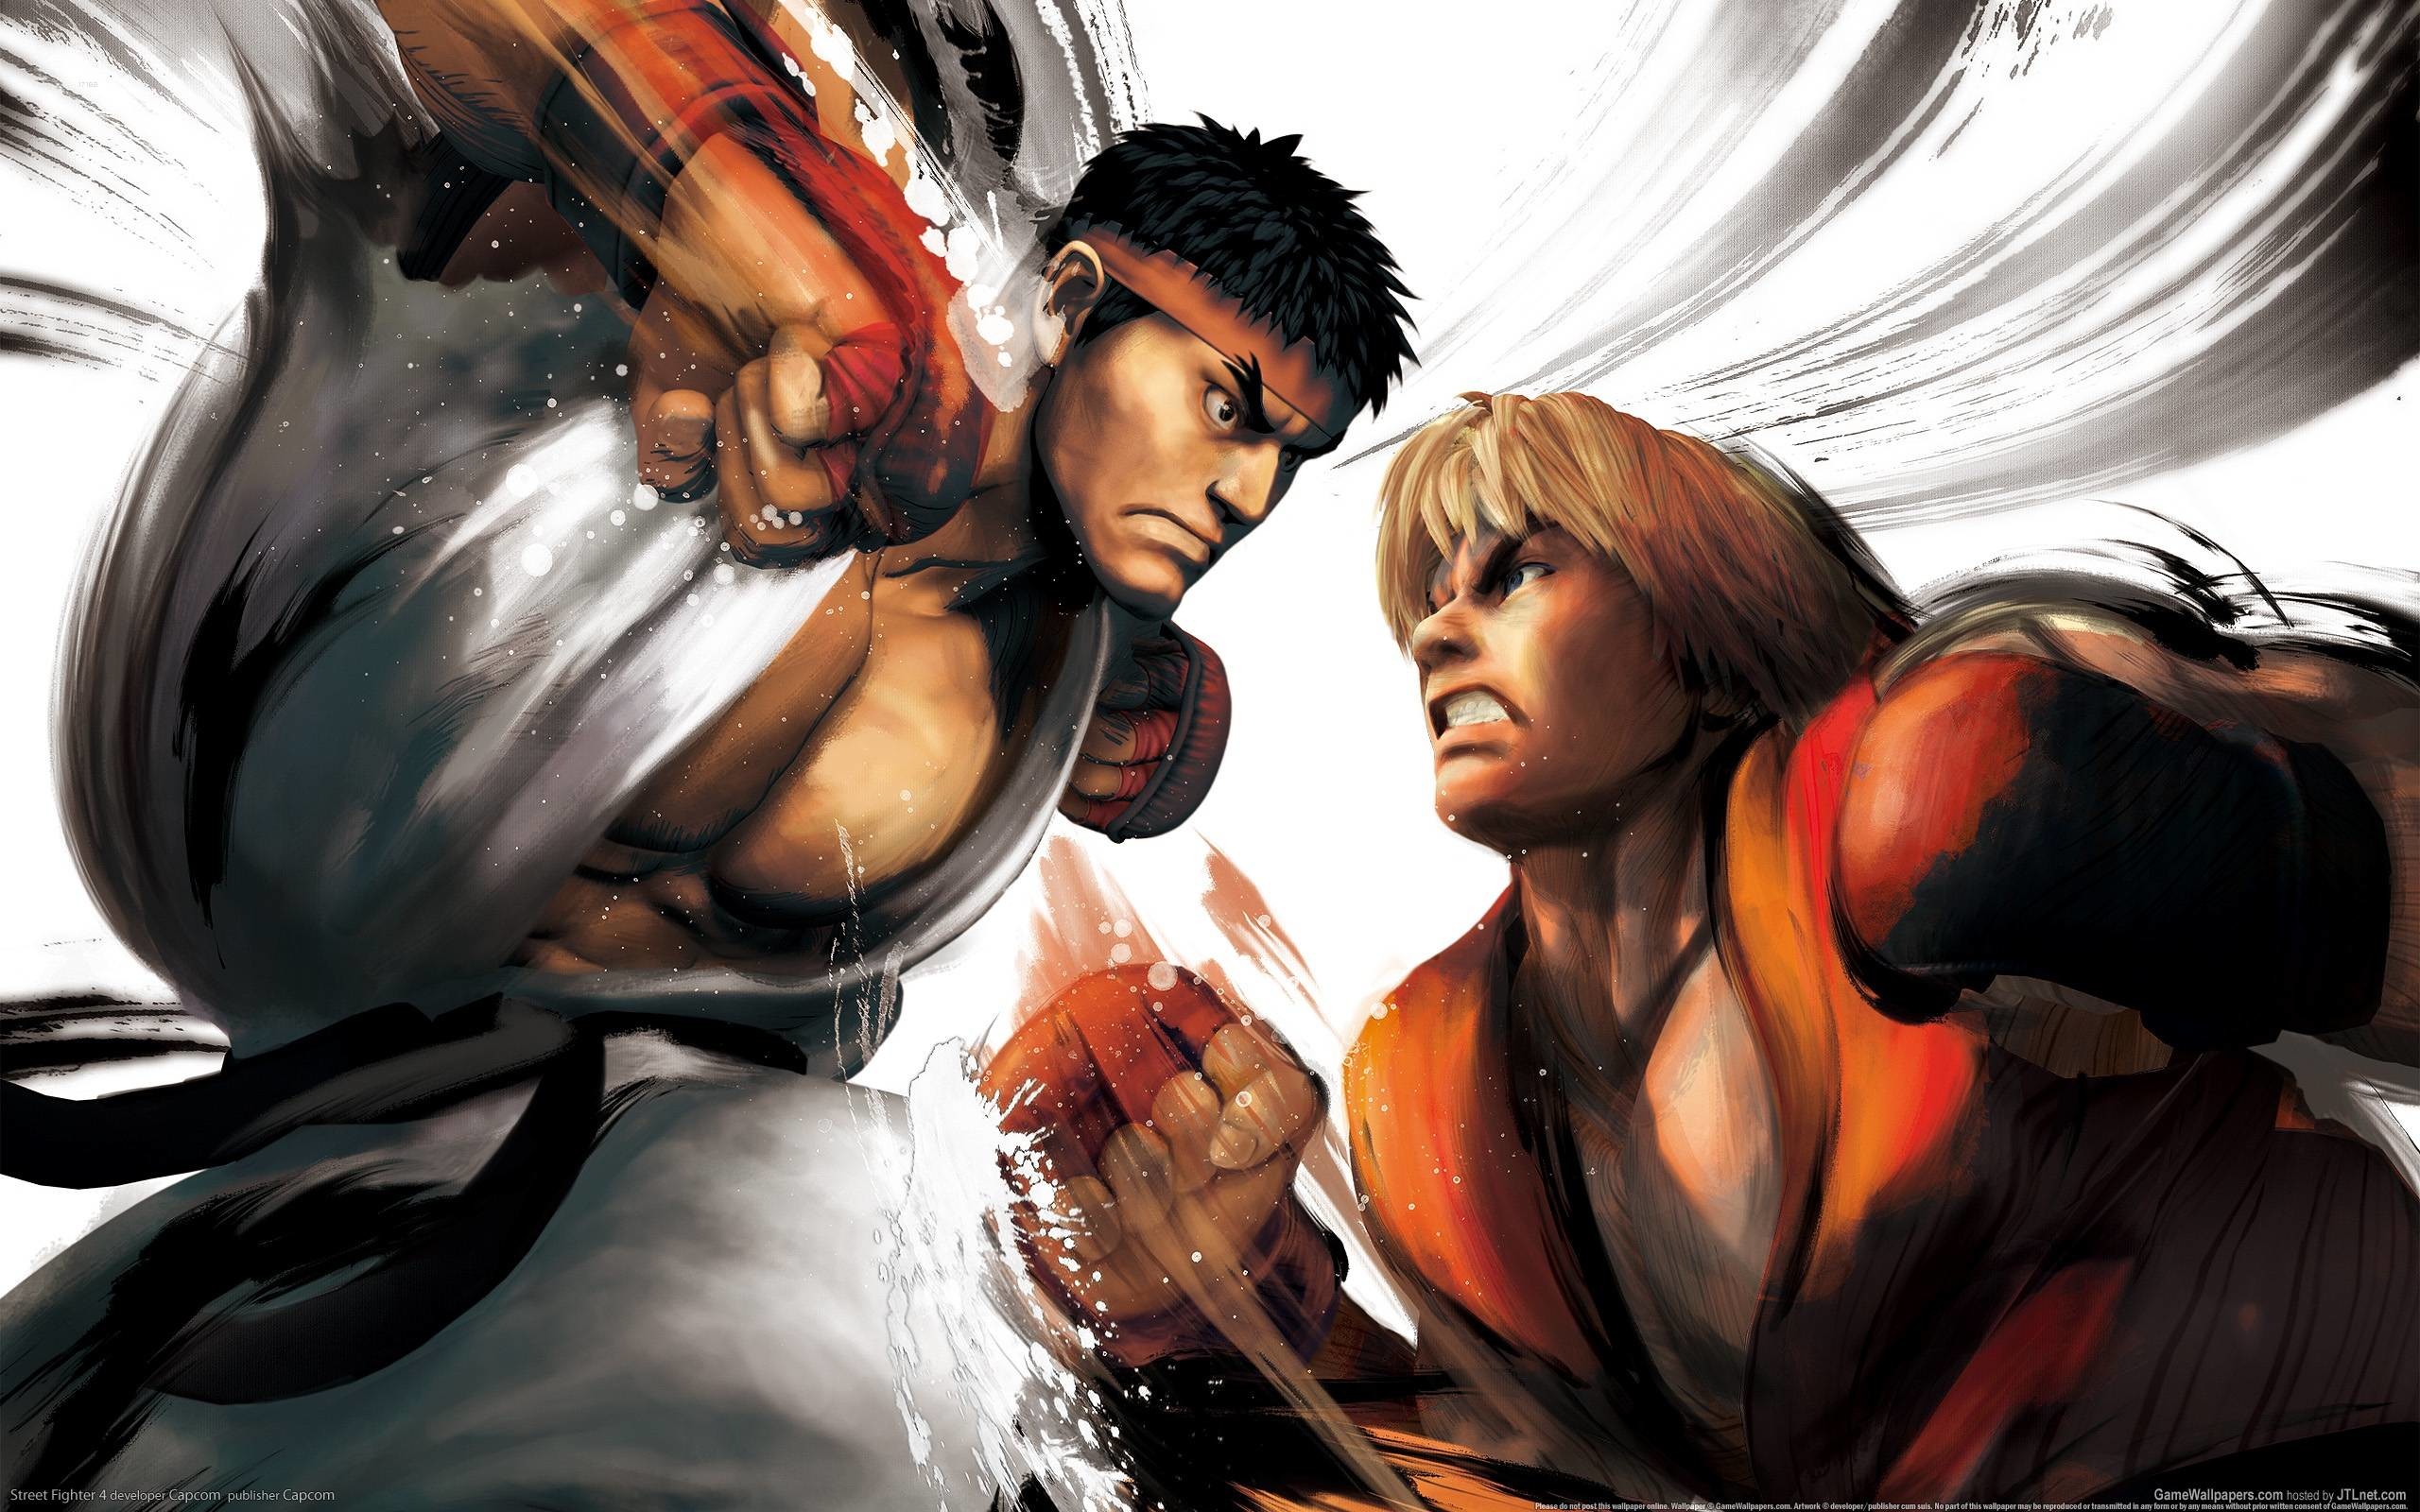 2560x1600 Street Fighter 4 wallpapers | Street Fighter 4 background - Page 11